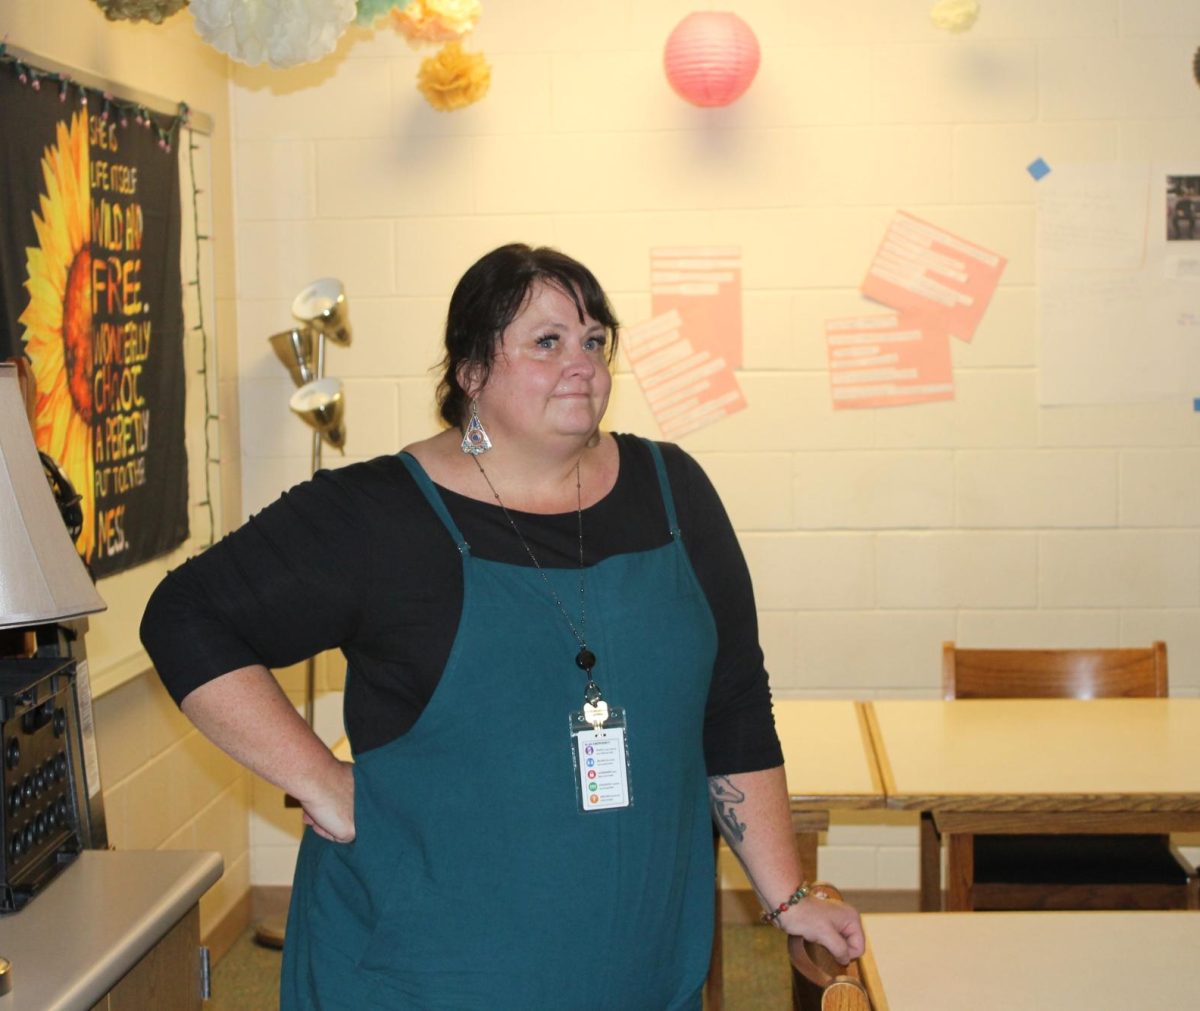 Jenny Long has a long history at GHS that goes back to her time as a student. This year, she also has become a teaching coach for the building.